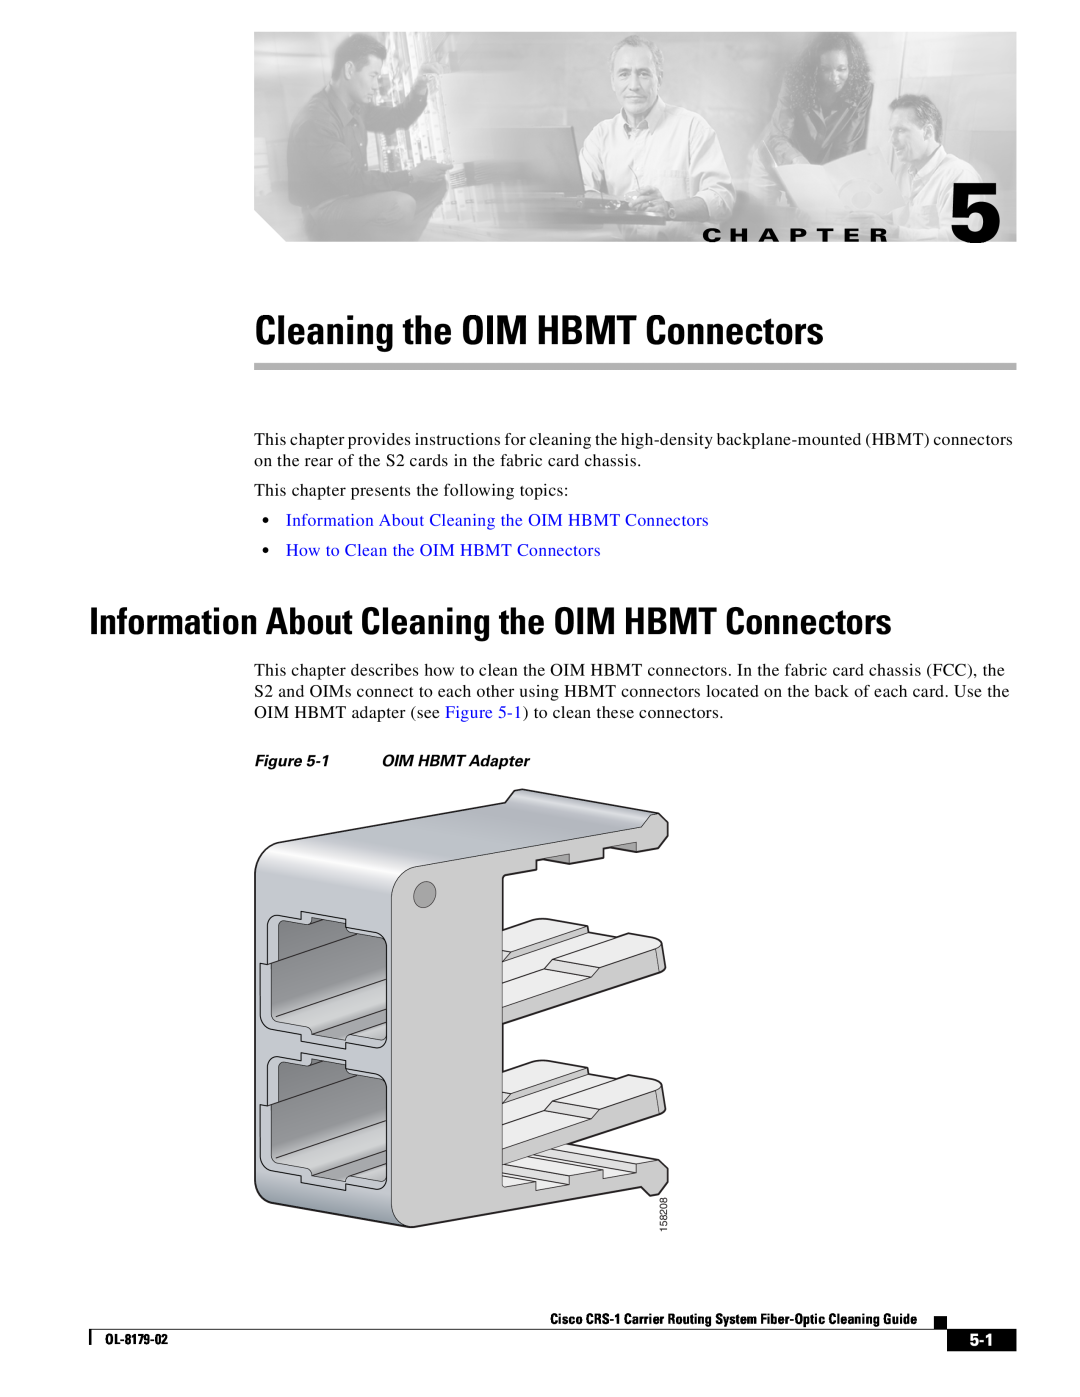 Cisco Systems CRS-1 manual Cleaning the OIM HBMT Connectors, •How to Clean the OIM HBMT Connectors, C H A P T E R 